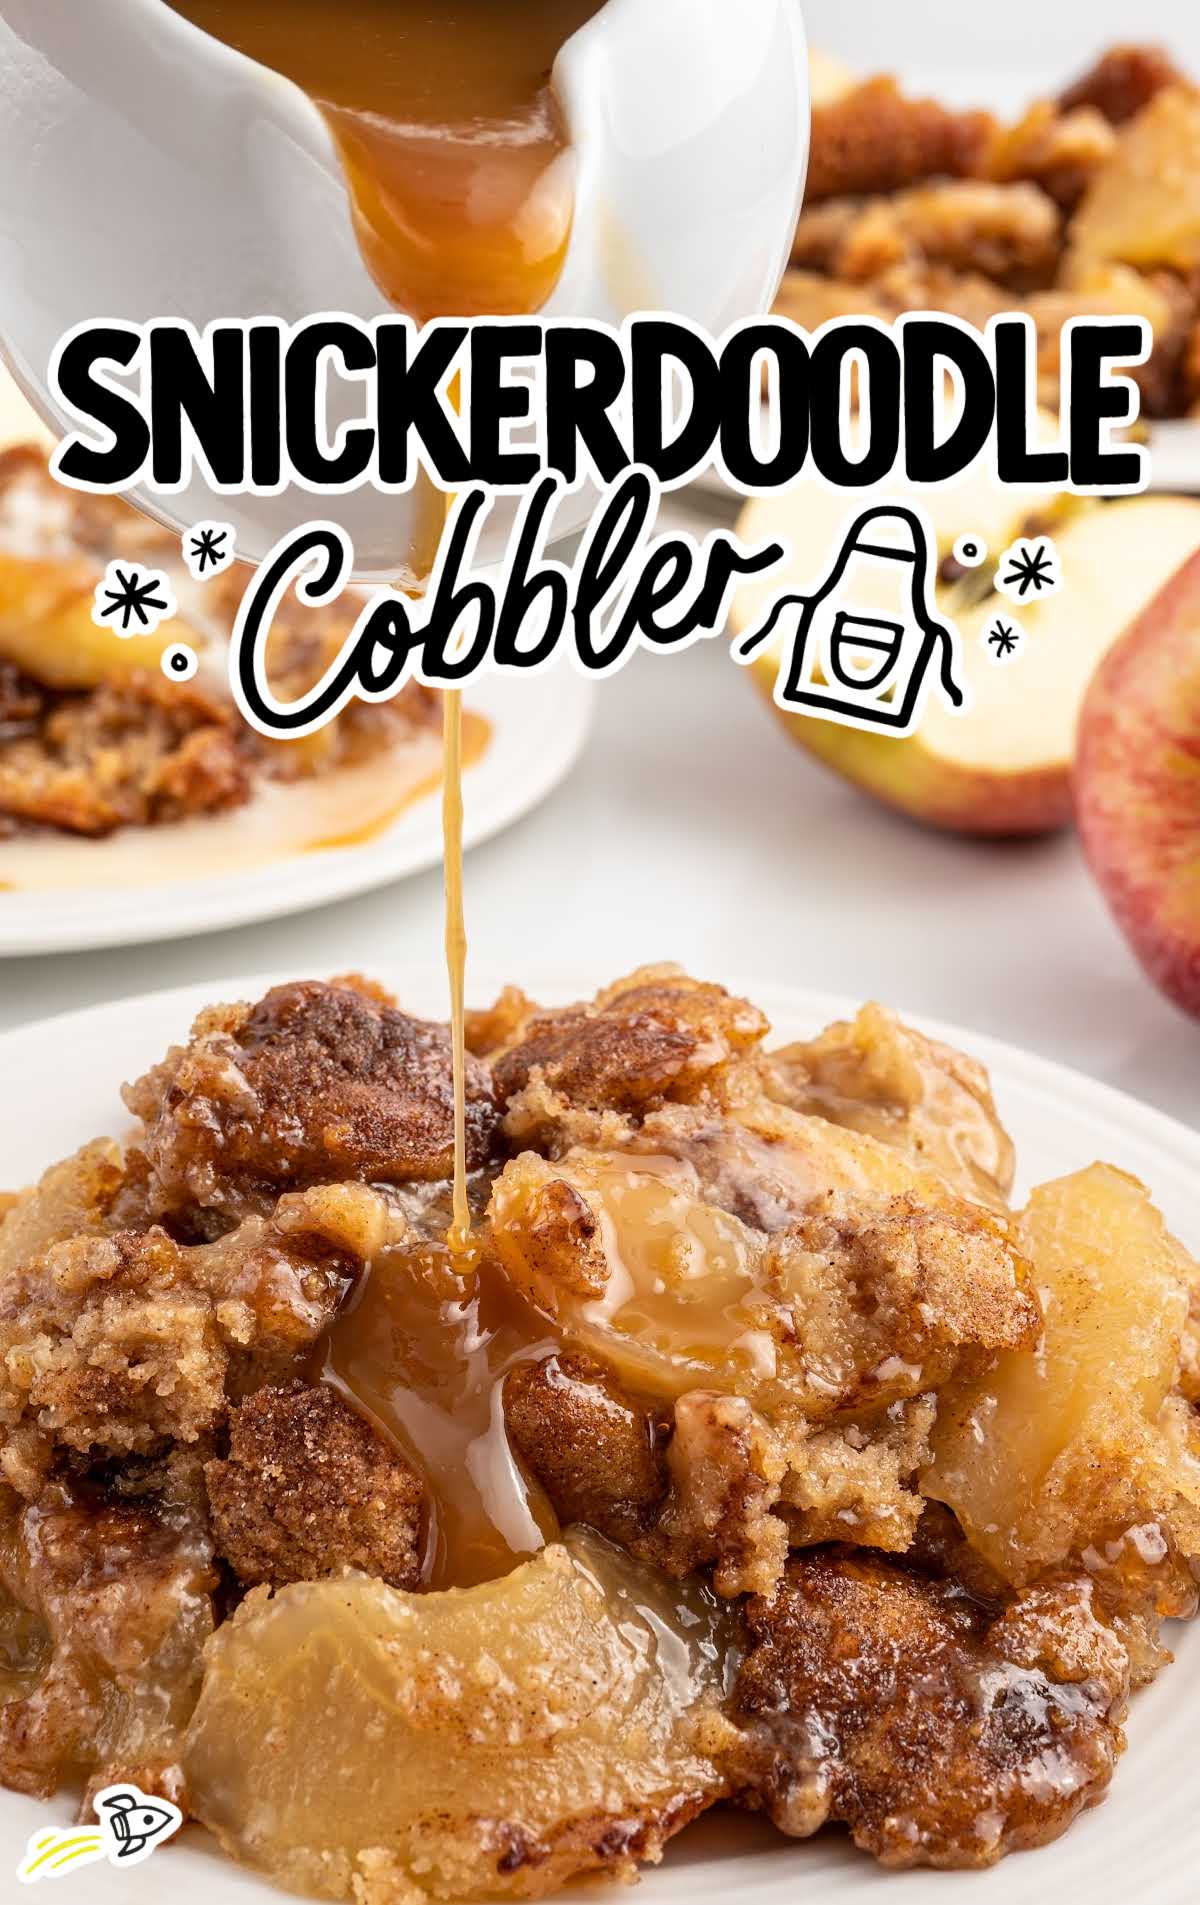 a close up shot of a piece of Snickerdoodle Cobbler on a plate drizzled with caramel